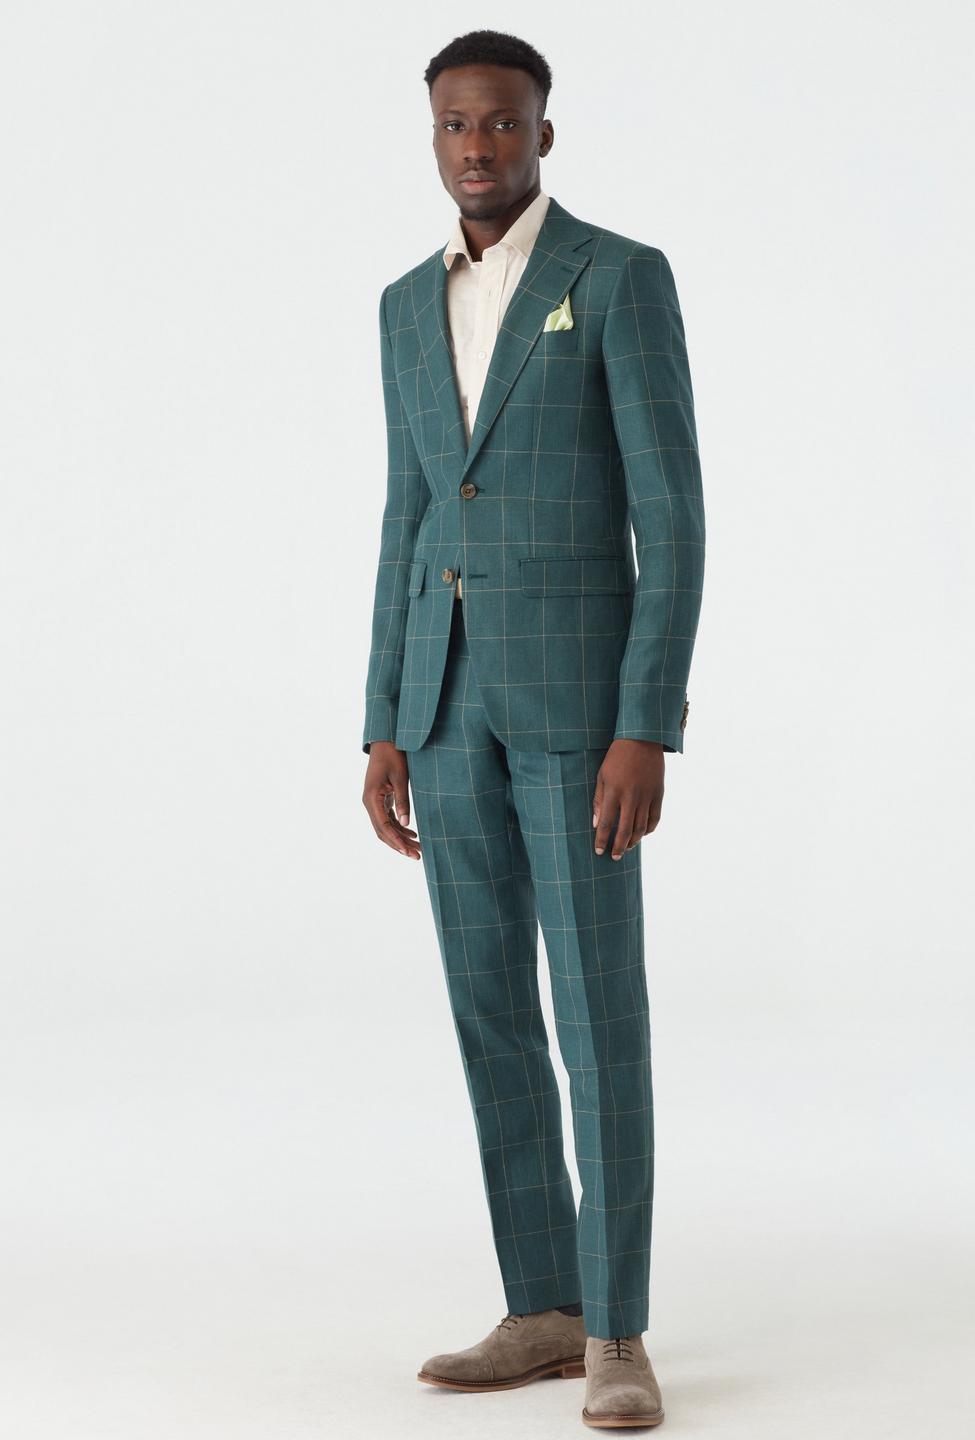 Green suit - Barnsley Checked Design from british Indochino Collection